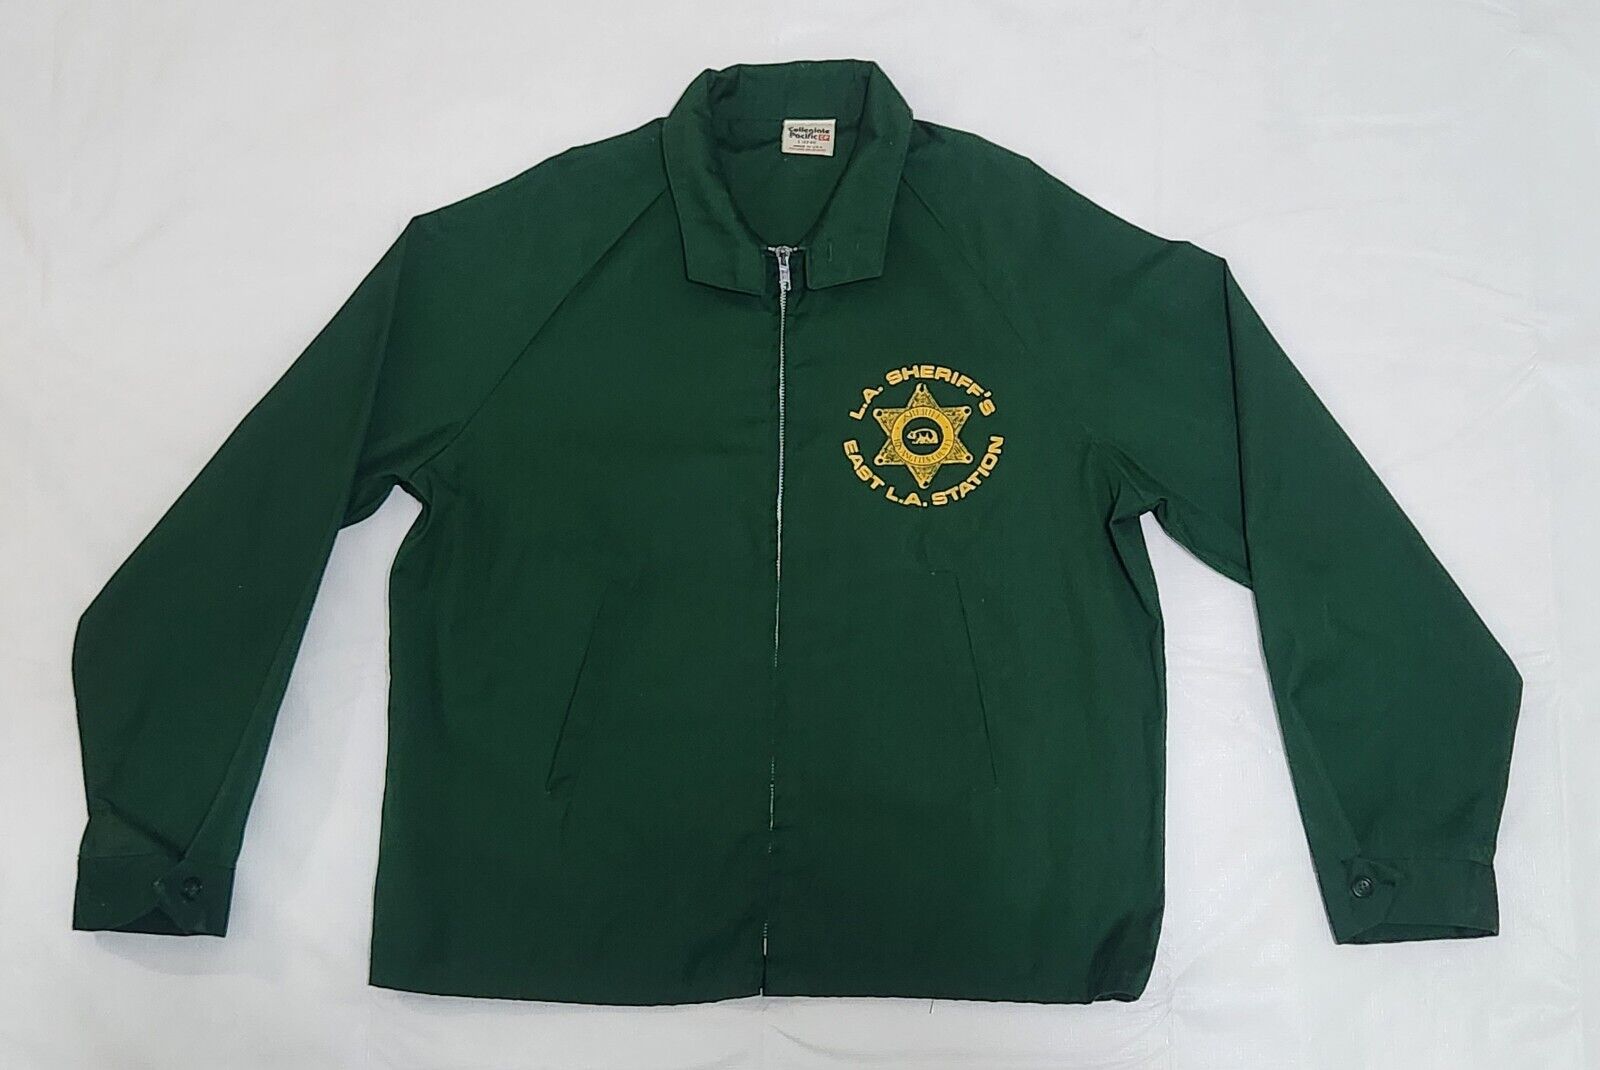 Vintage Los Angeles Sheriff East L.A. Station Green Full Zip Jacket Size L 42-44